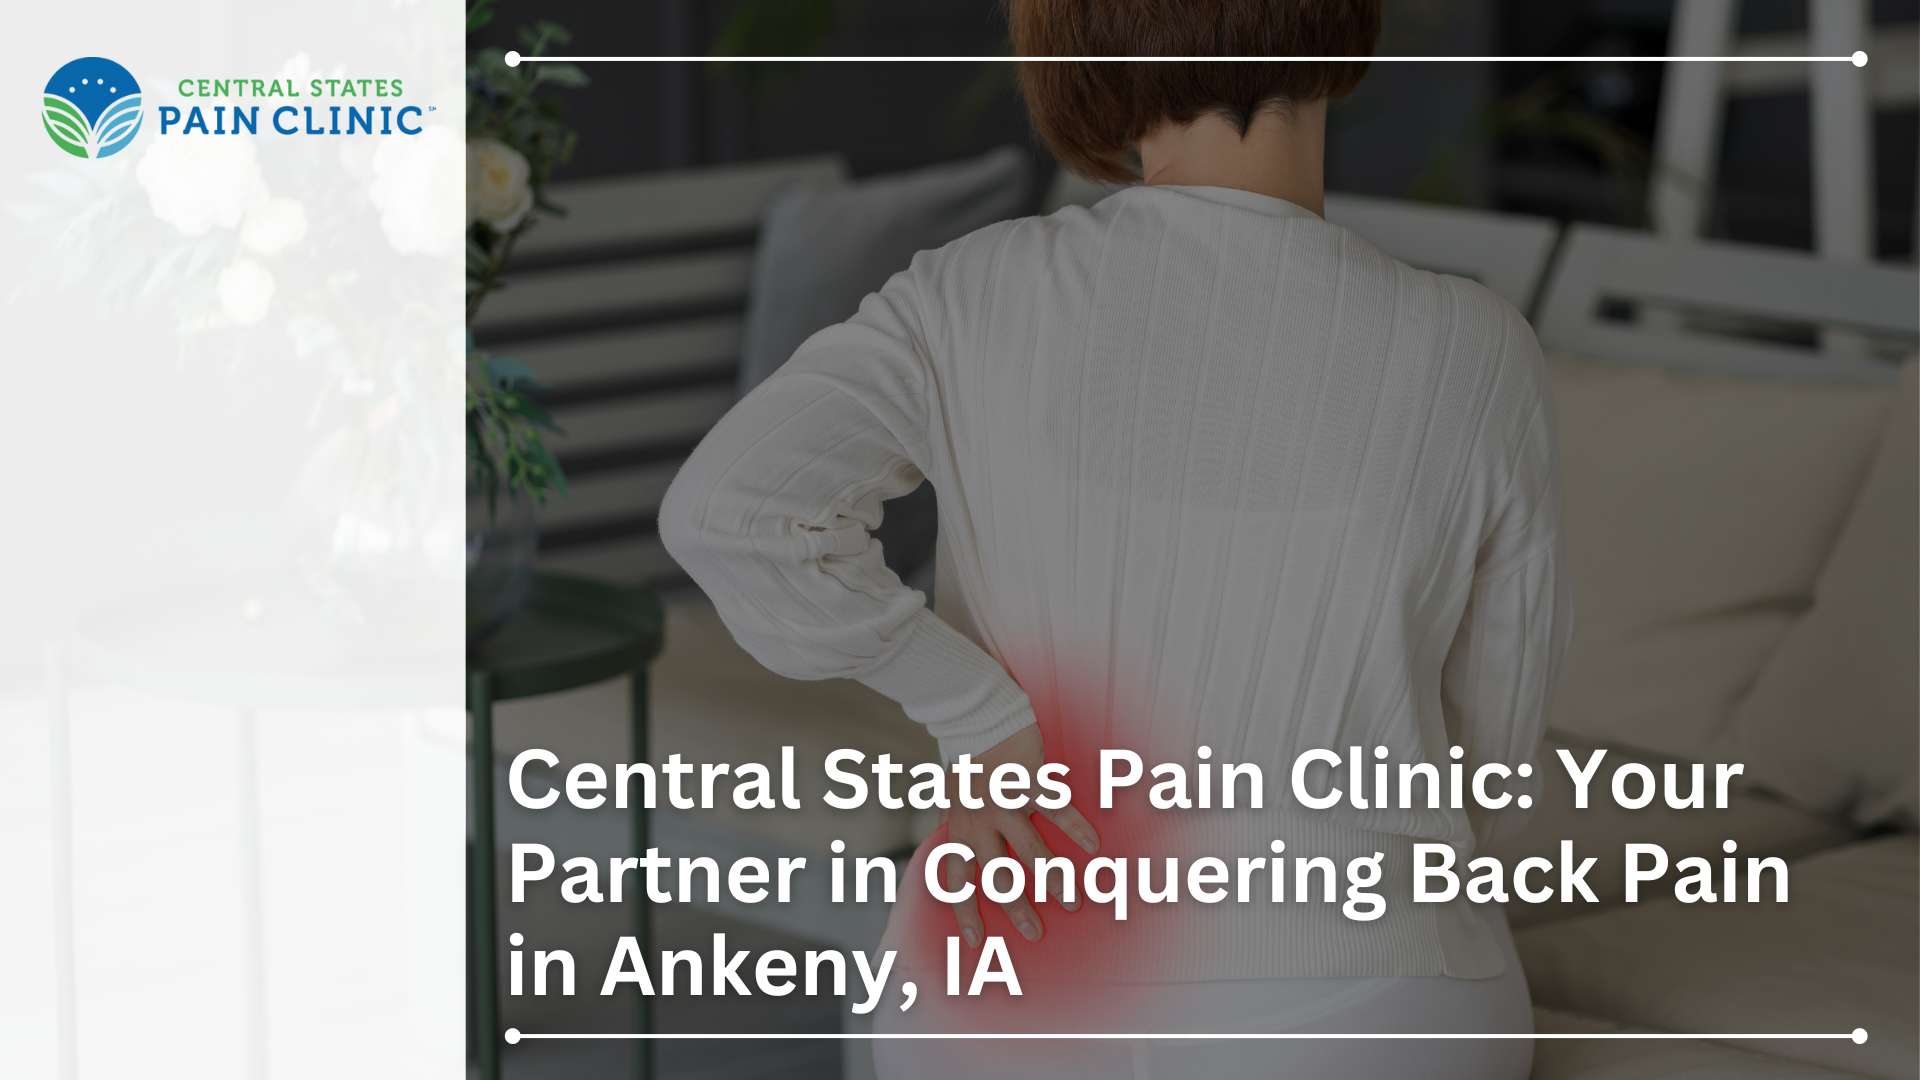 Central States Pain Clinic: Your Partner in Conquering Back Pain in Ankeny, IA